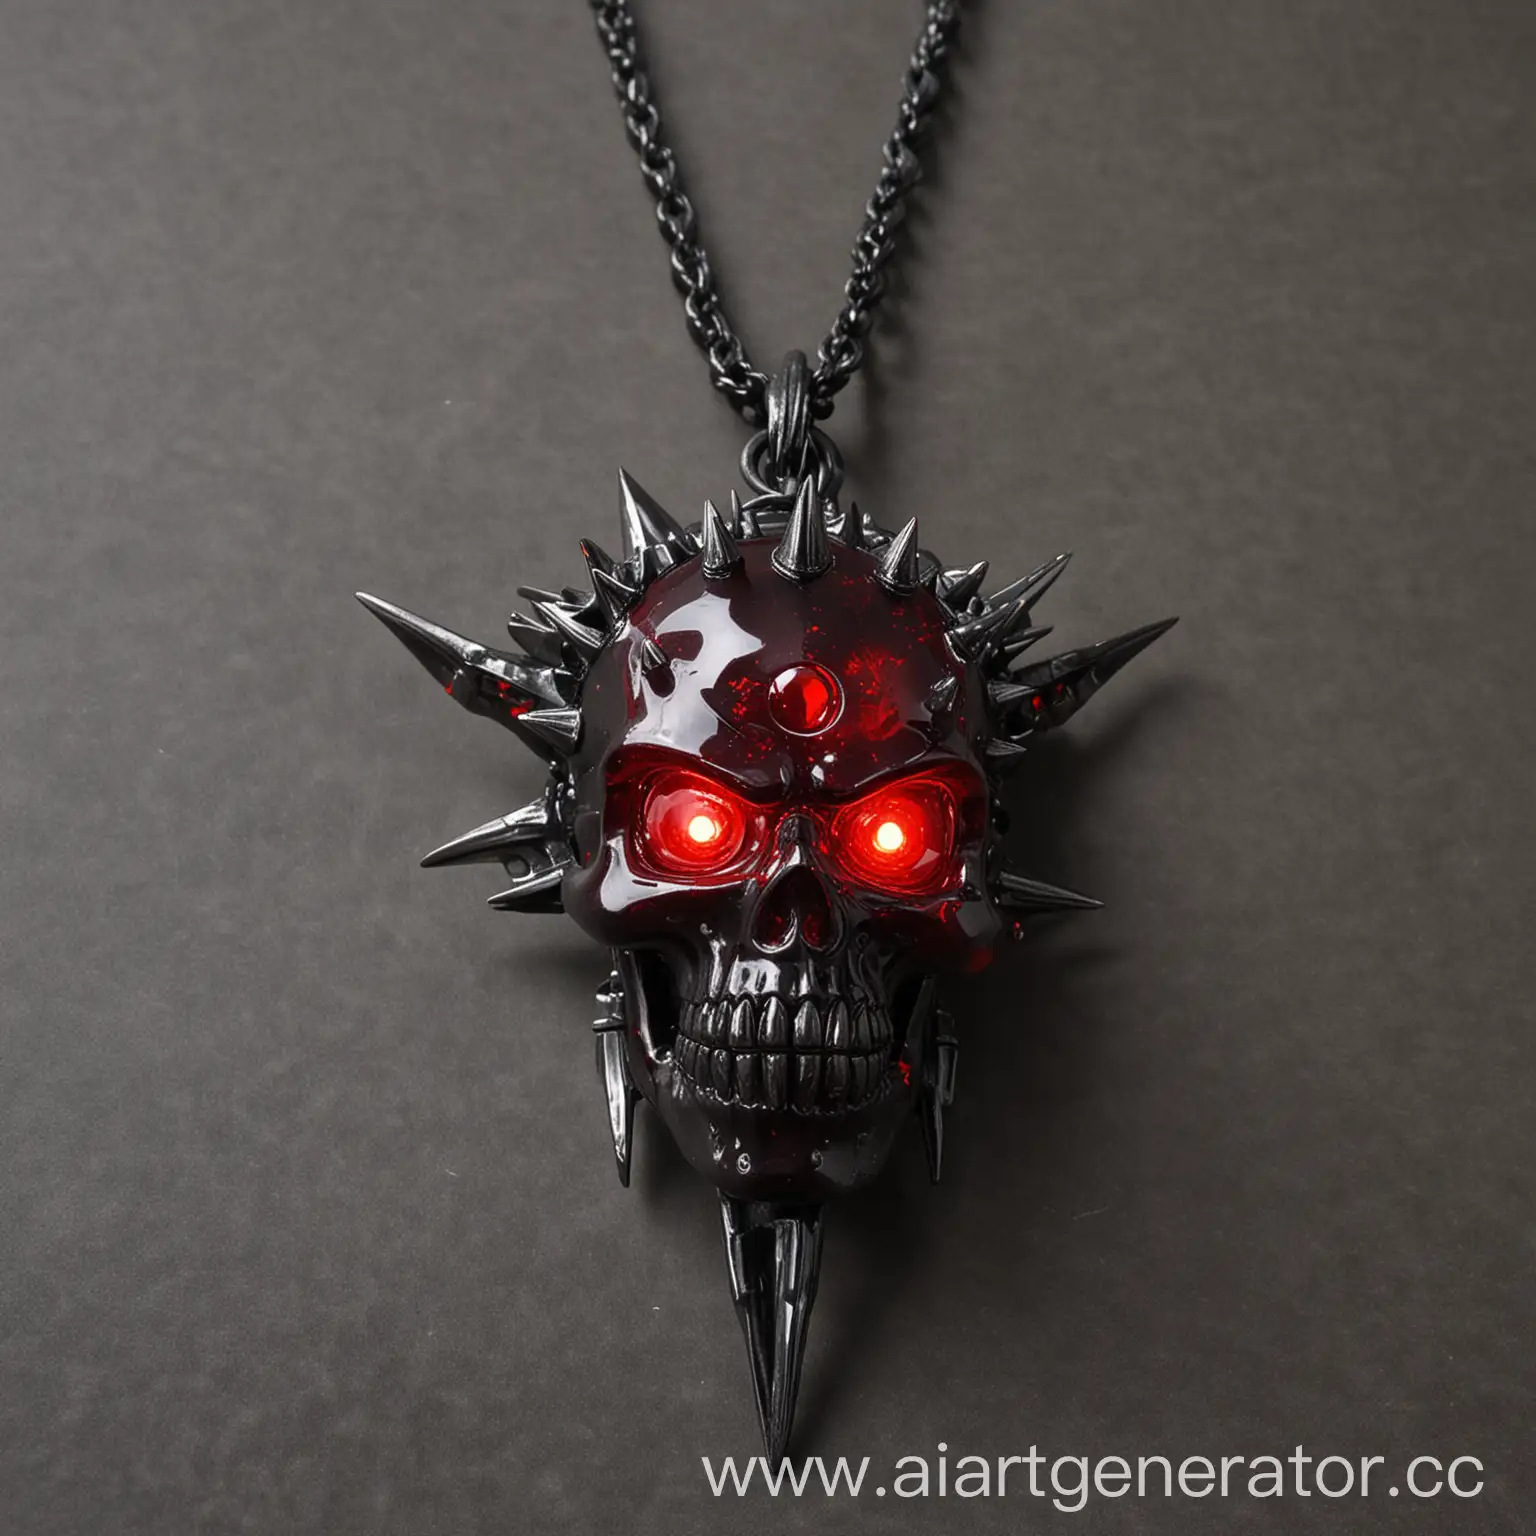 Glowing-Red-Crystal-Skull-with-Spiked-Temples-on-Bone-Chain